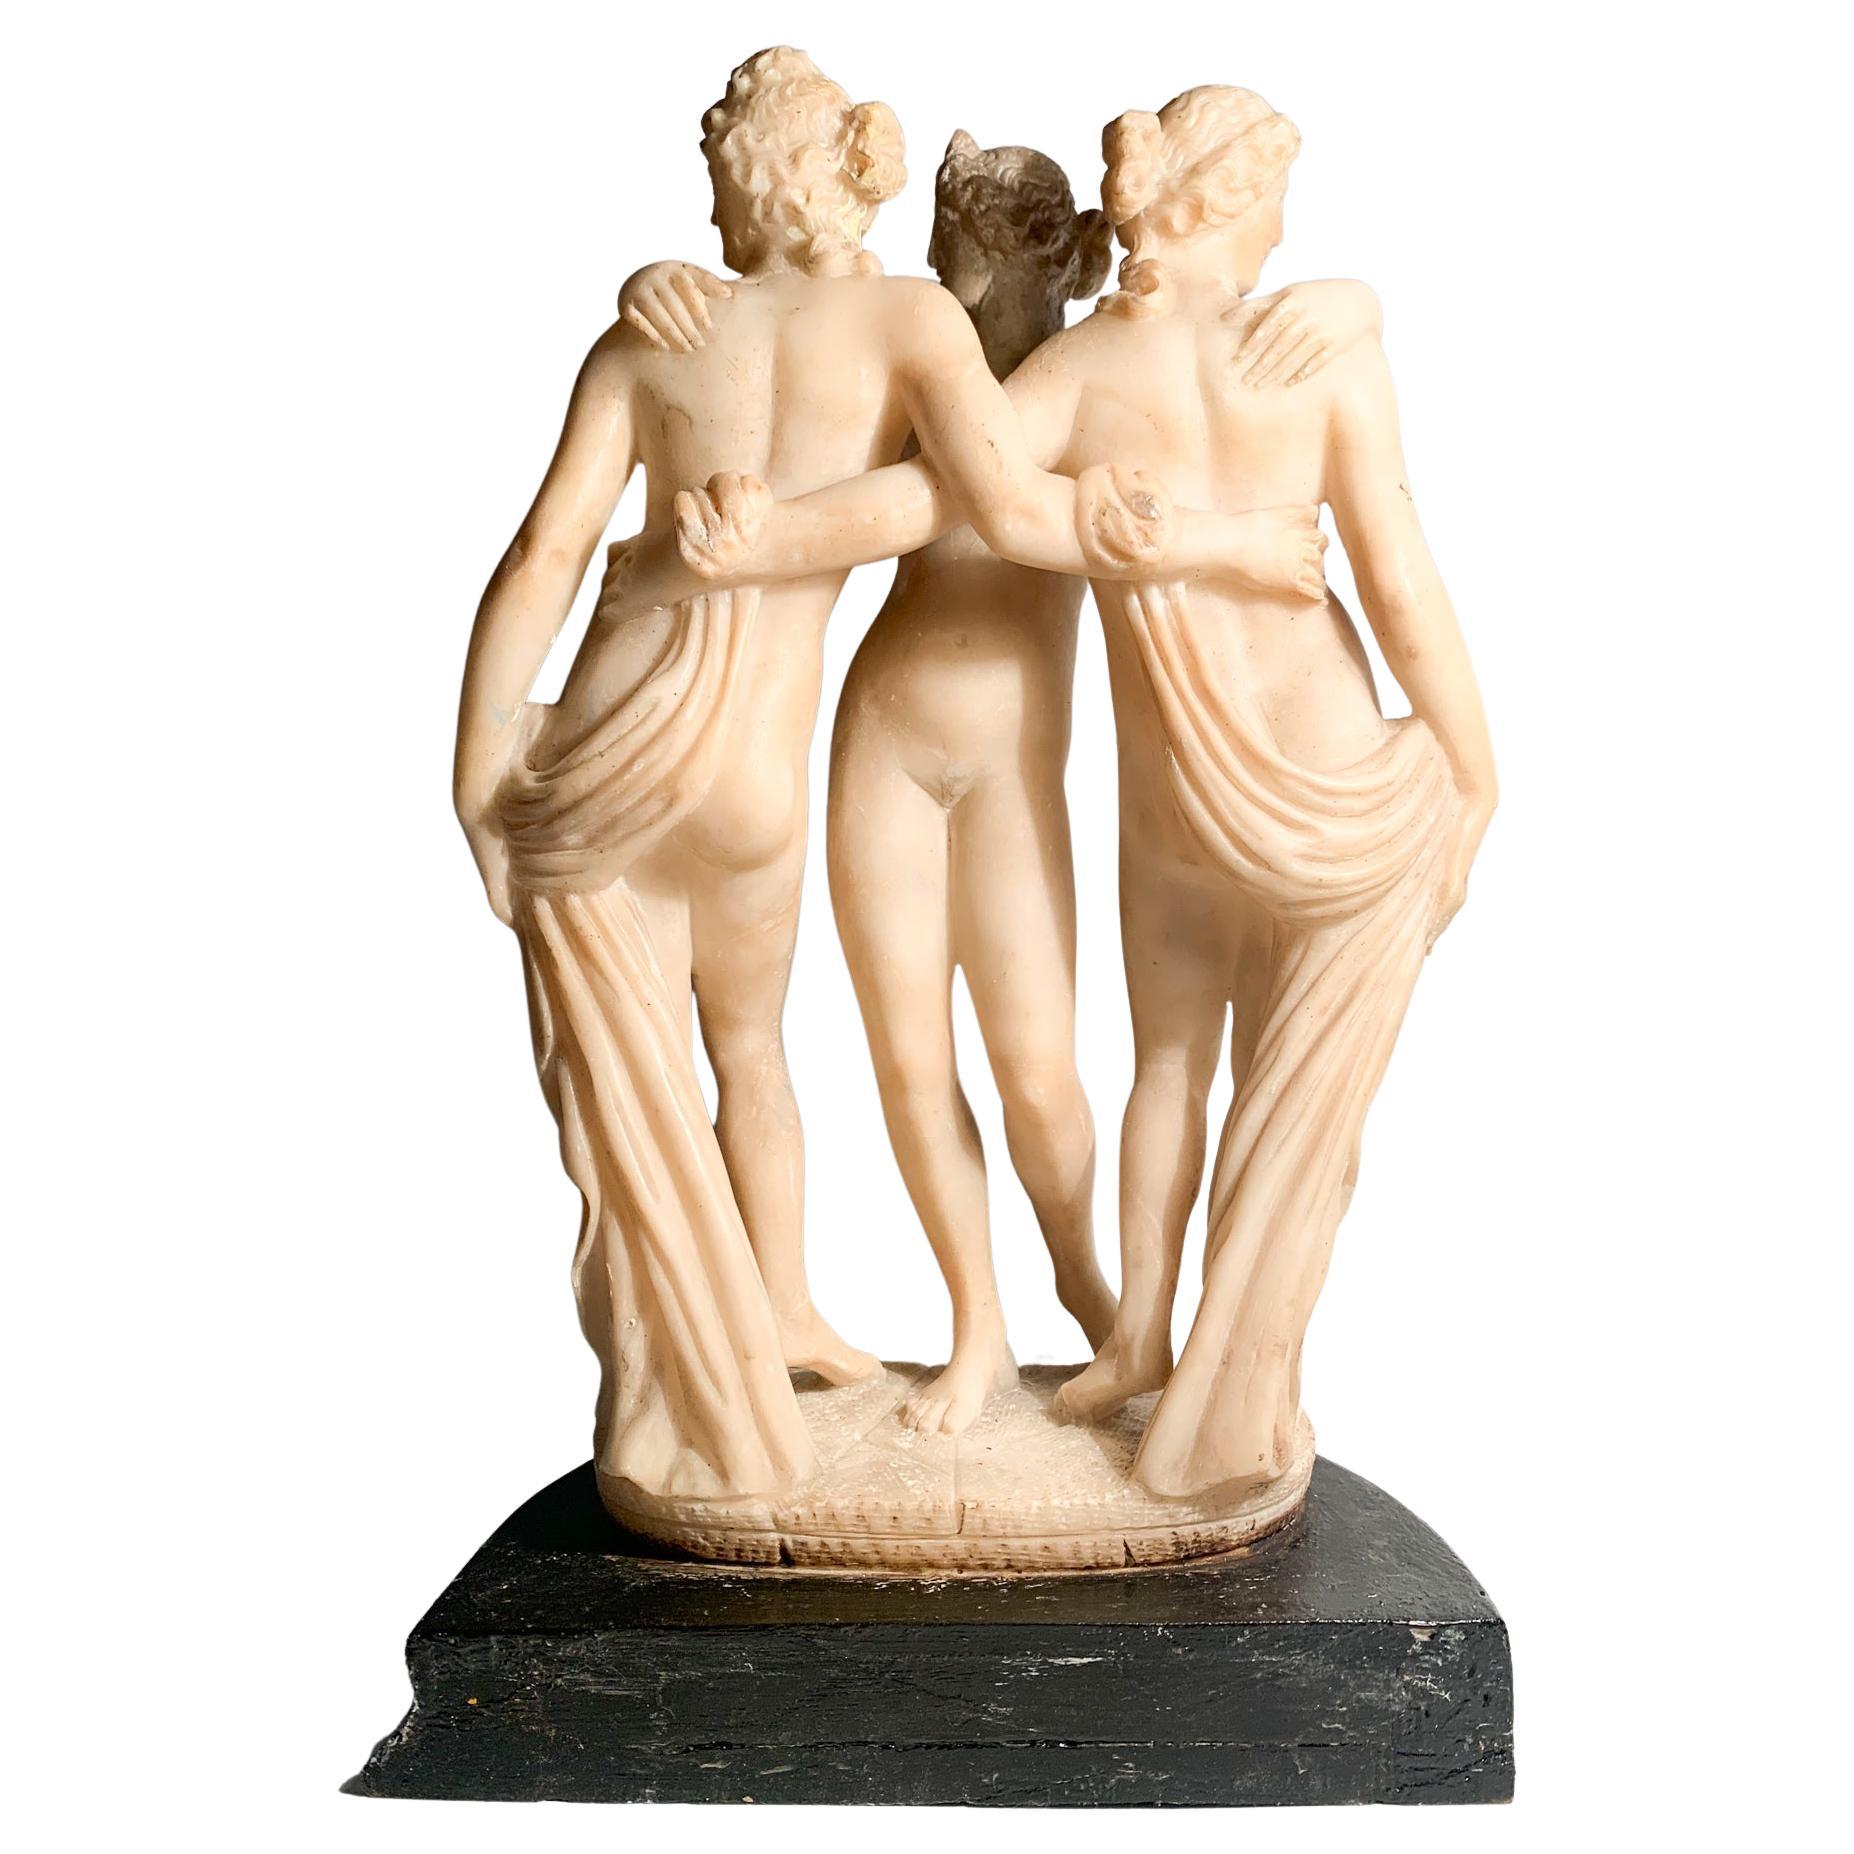 Italian Marble Sculpture of the Three Graces from the 1940s